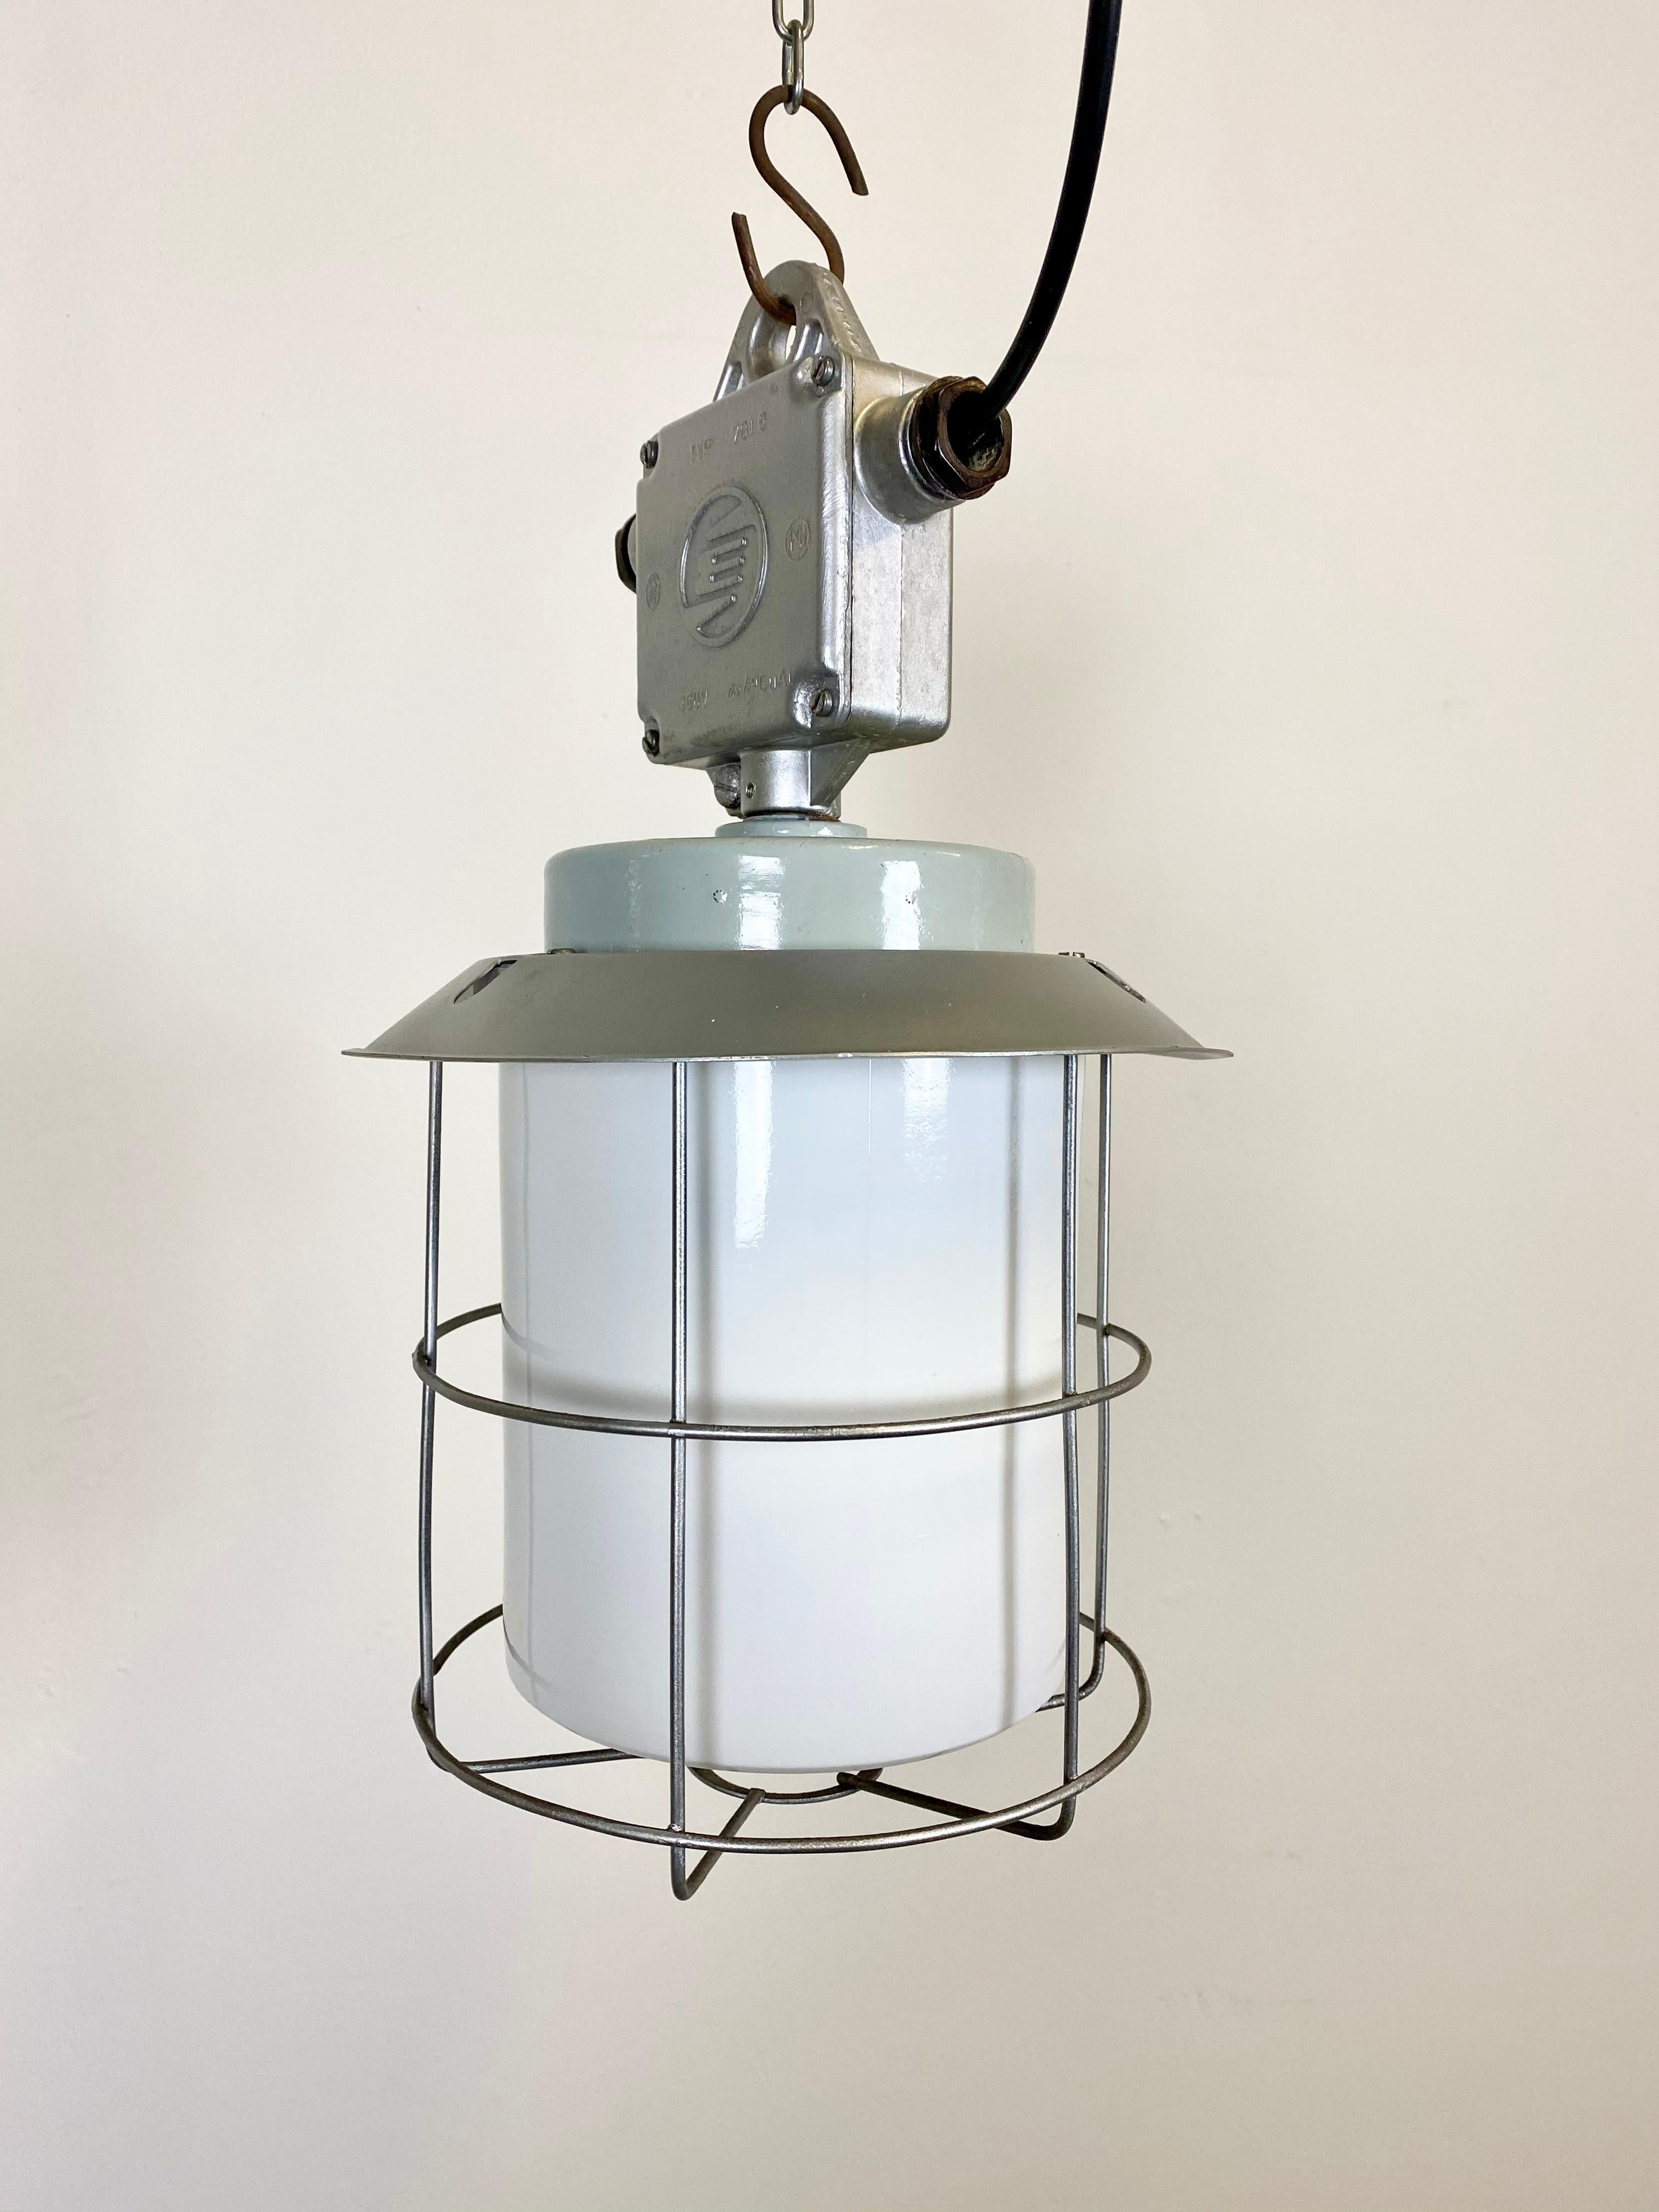 This industrial lamp in aluminium with milky glass was produced by Elektrosvit in former Czechoslovakia during the 1970s. Iron cage. New porcelain socket for E 27 lightbulbs and wire. The weight of the lamp is 2 kg.